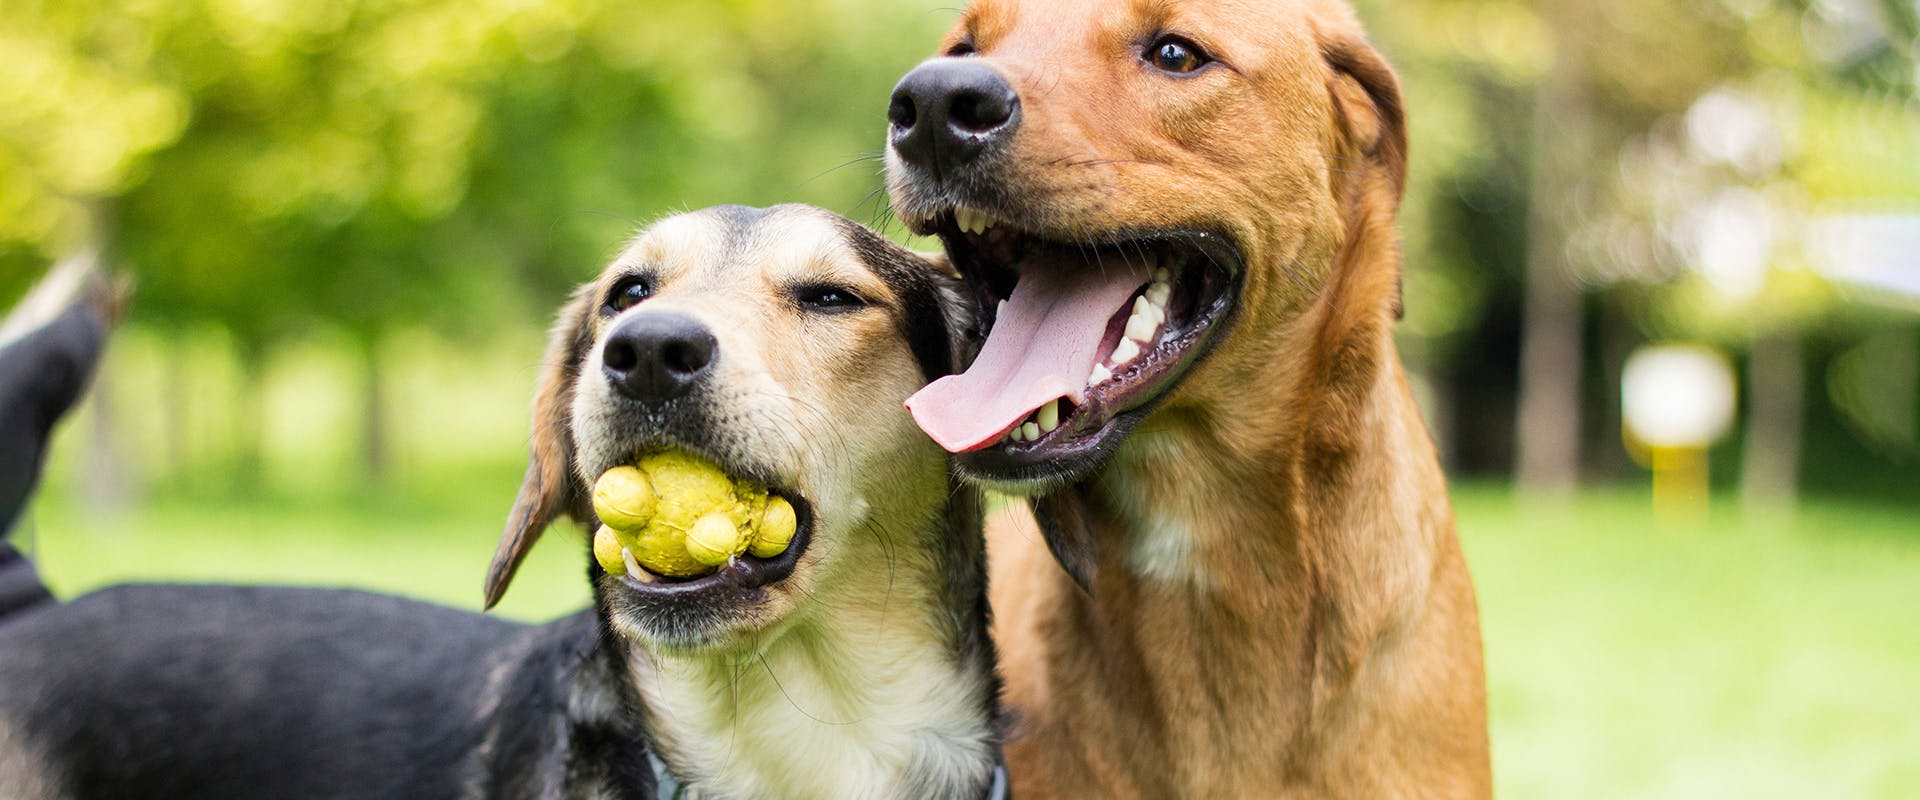 Two dogs in a ball park, one holding a bright yellow ball in its mouth